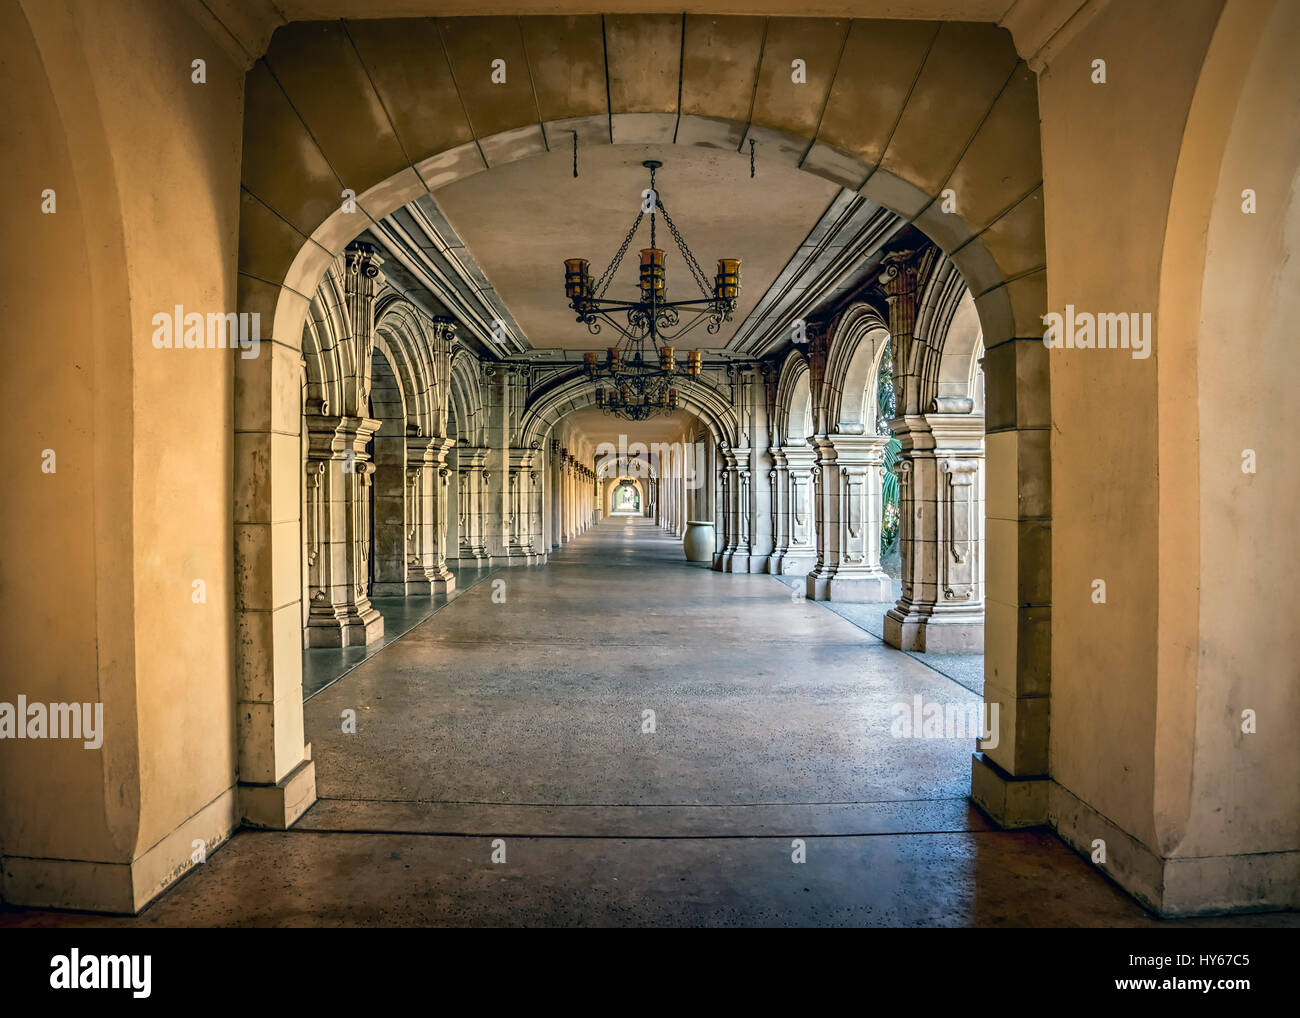 The Spanish architecture of a corridor at Balboa Park in San Diego, CA Stock Photo